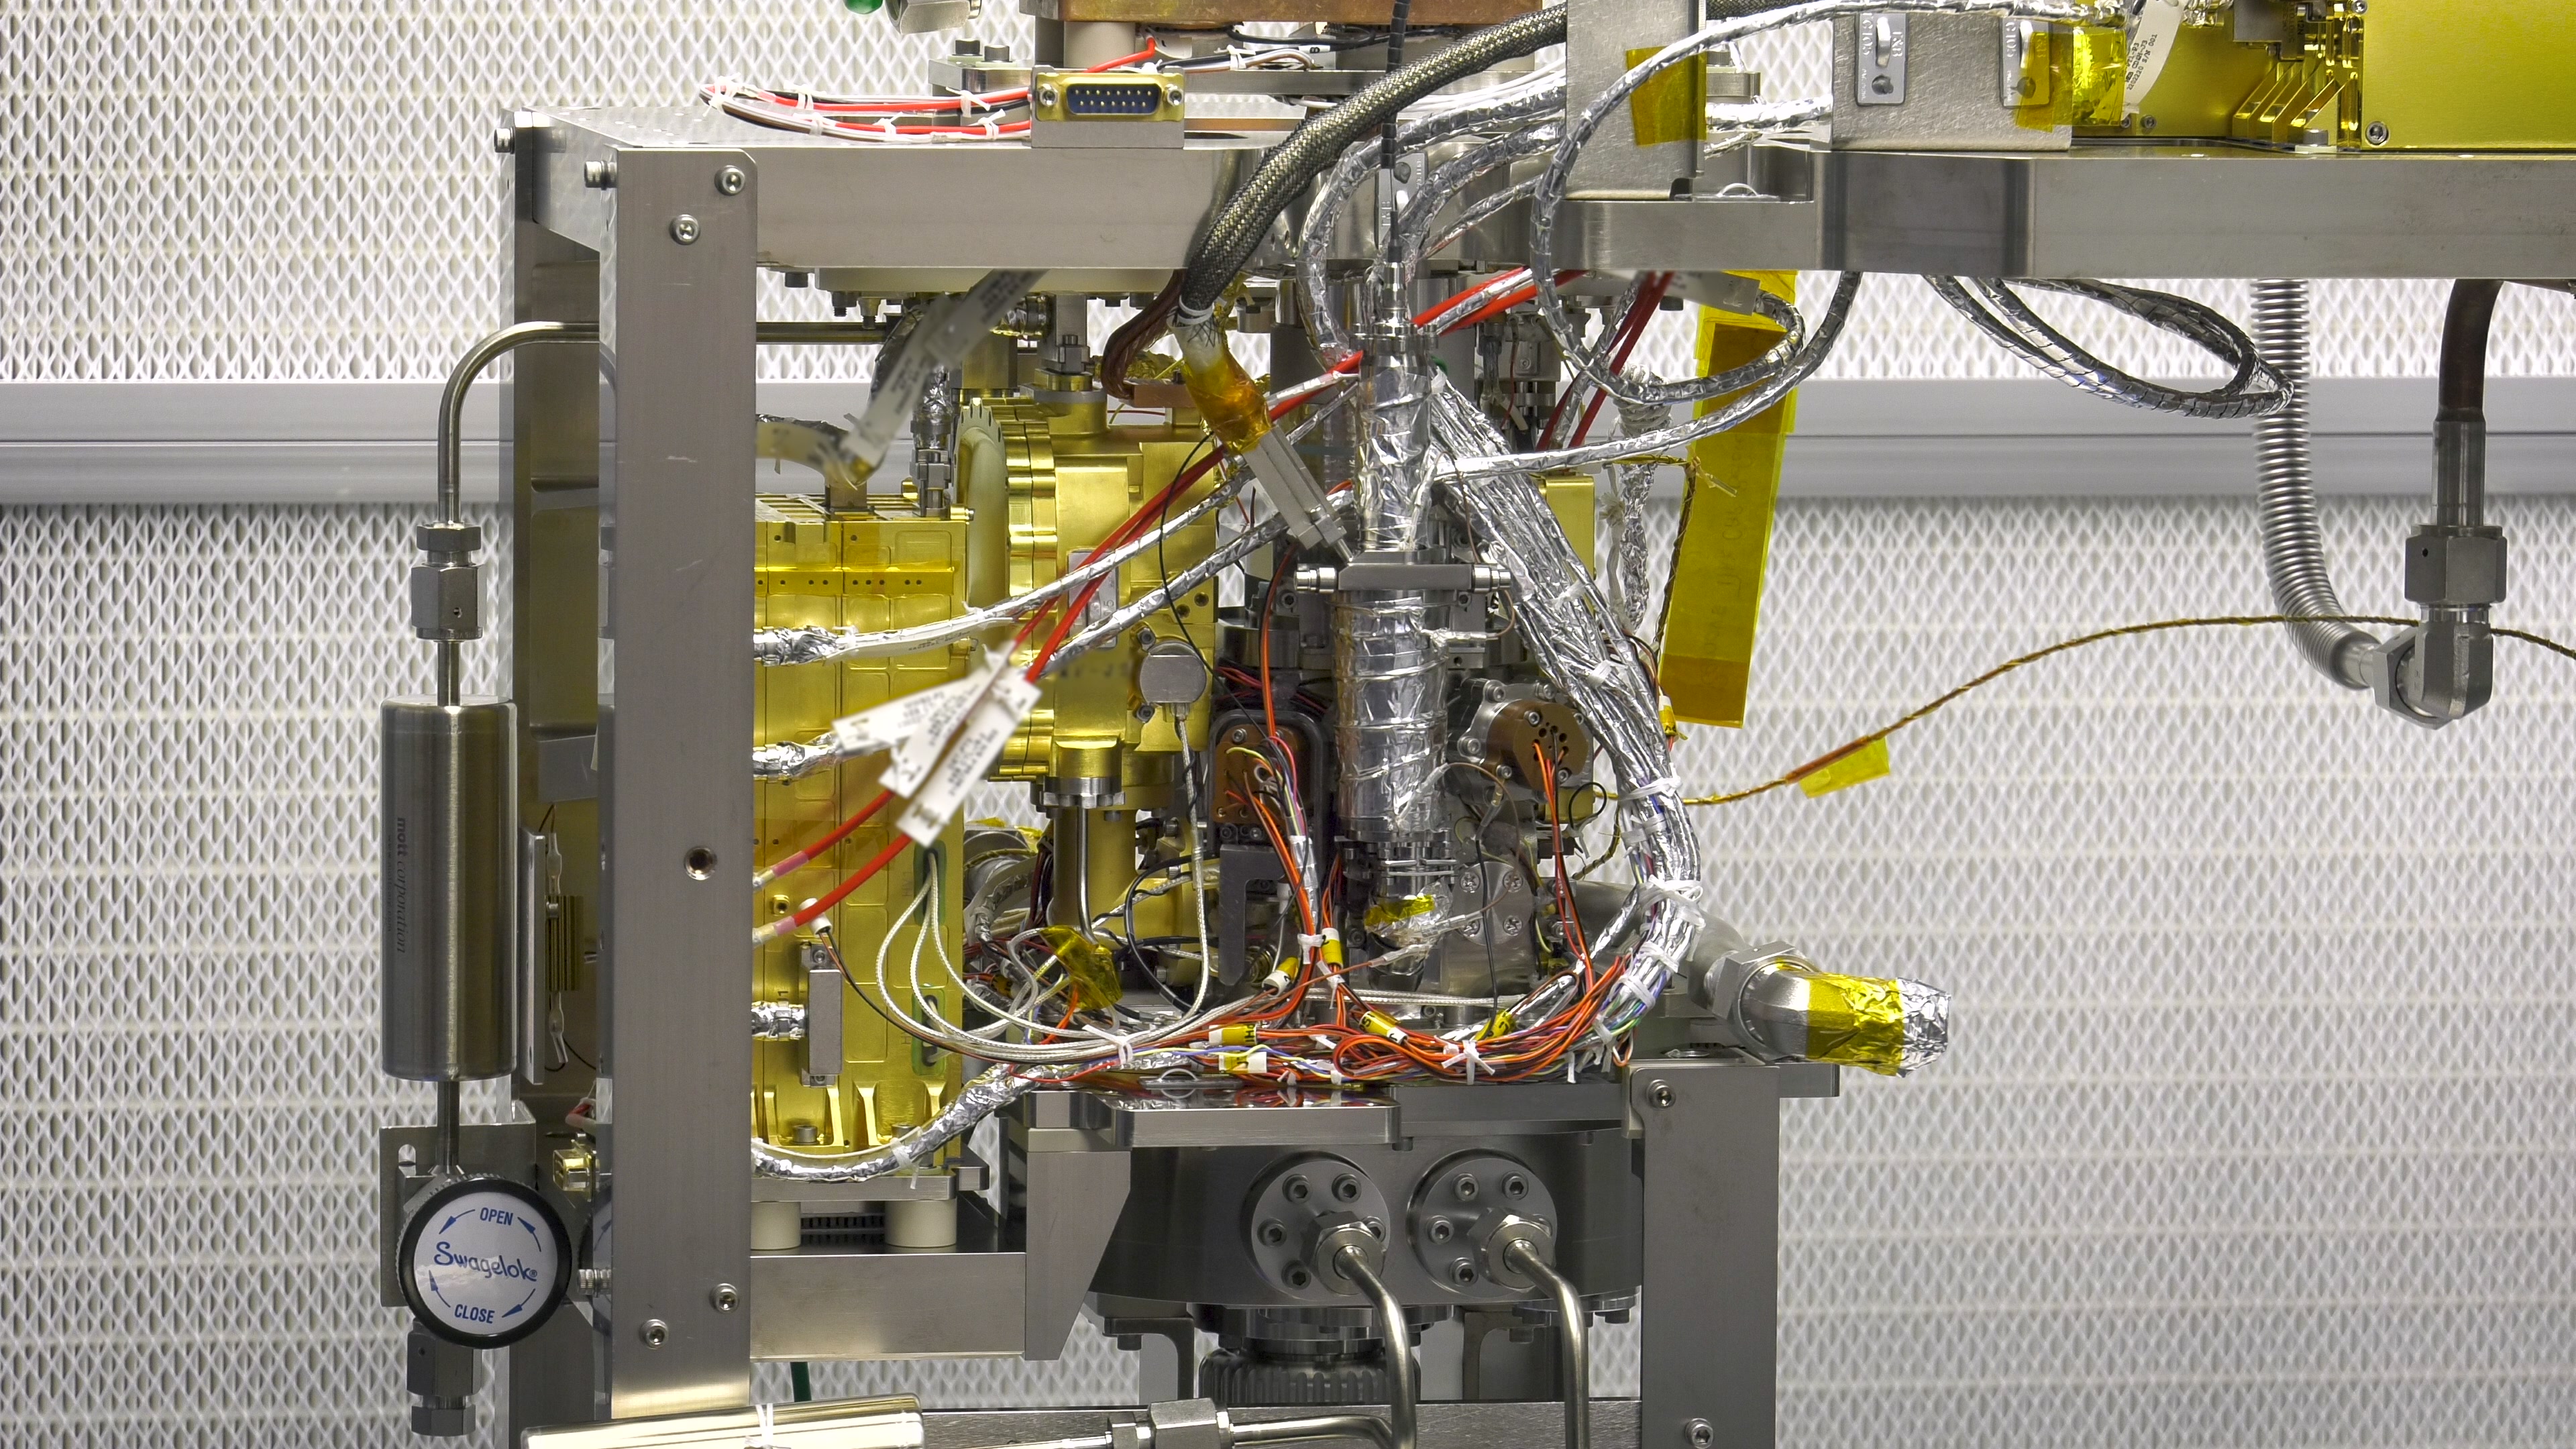 Highlight reel of the MOMA instrument during testing:00:00 - close up of the mass spectrometer subsystem00:06 - cleaning MOMA inside the Mars thermal vacuum chamber (TVAC)00:56 - preparation for electromagnetic interference (EMI) testing